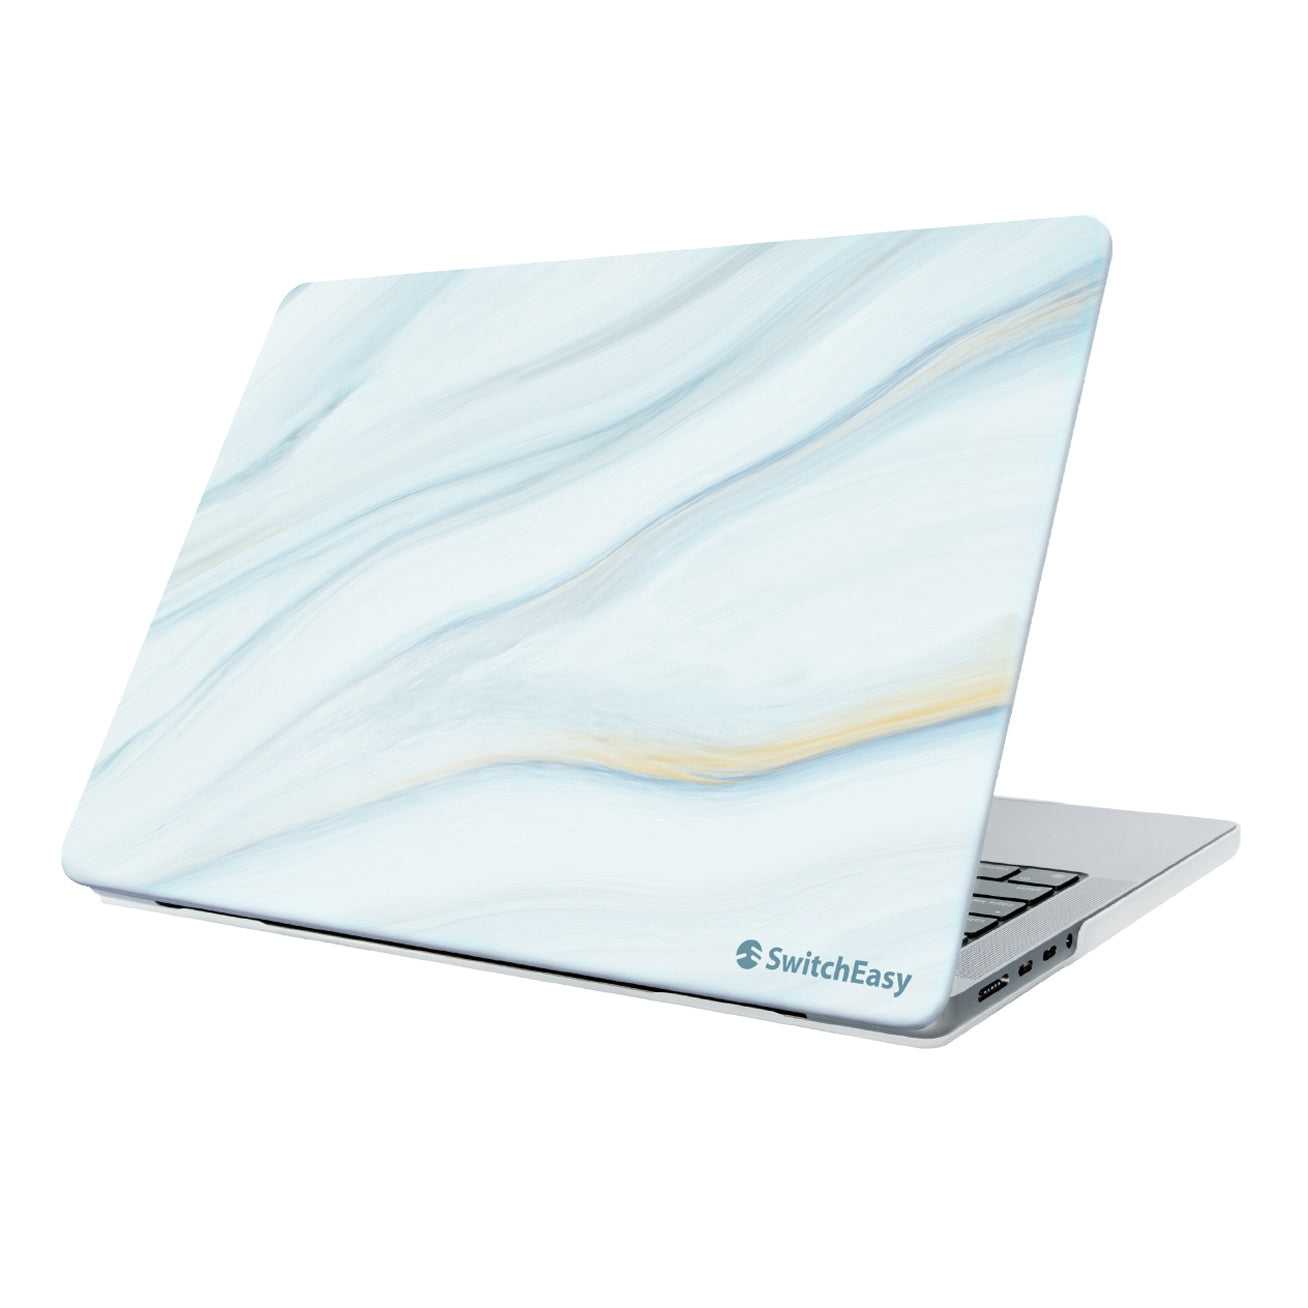 SwitchEasy Marble MacBook Protective Case for MacBook Pro 13"(M1/Intel) Default SwitchEasy Cloudy White 